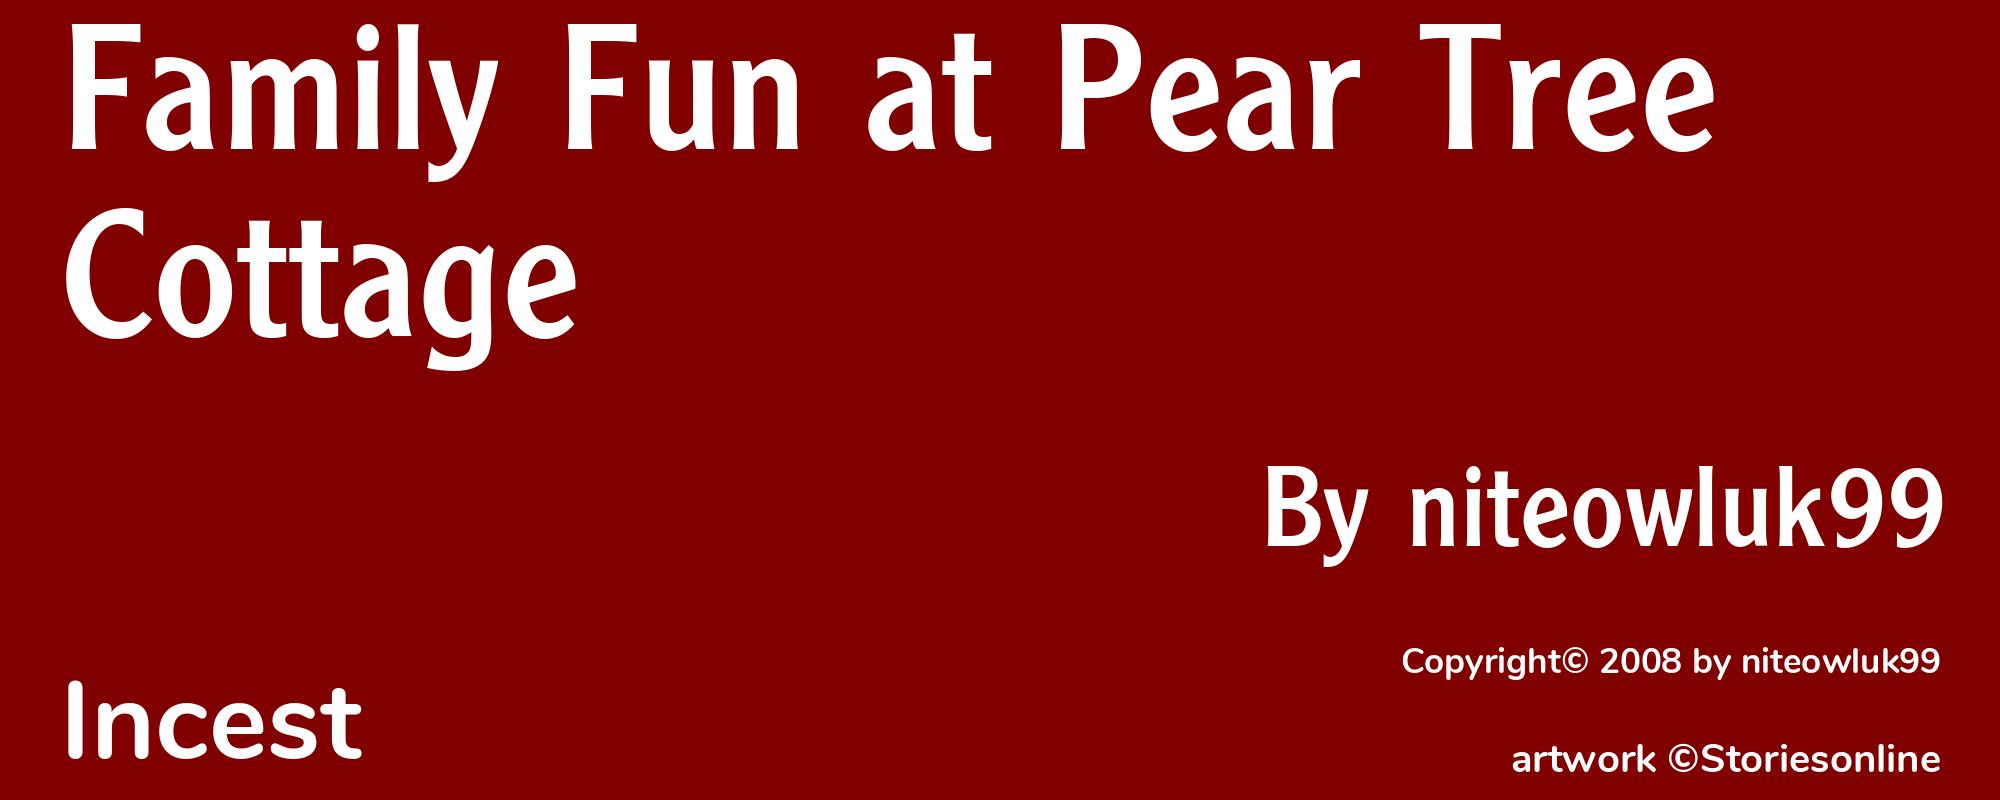 Family Fun at Pear Tree Cottage - Cover